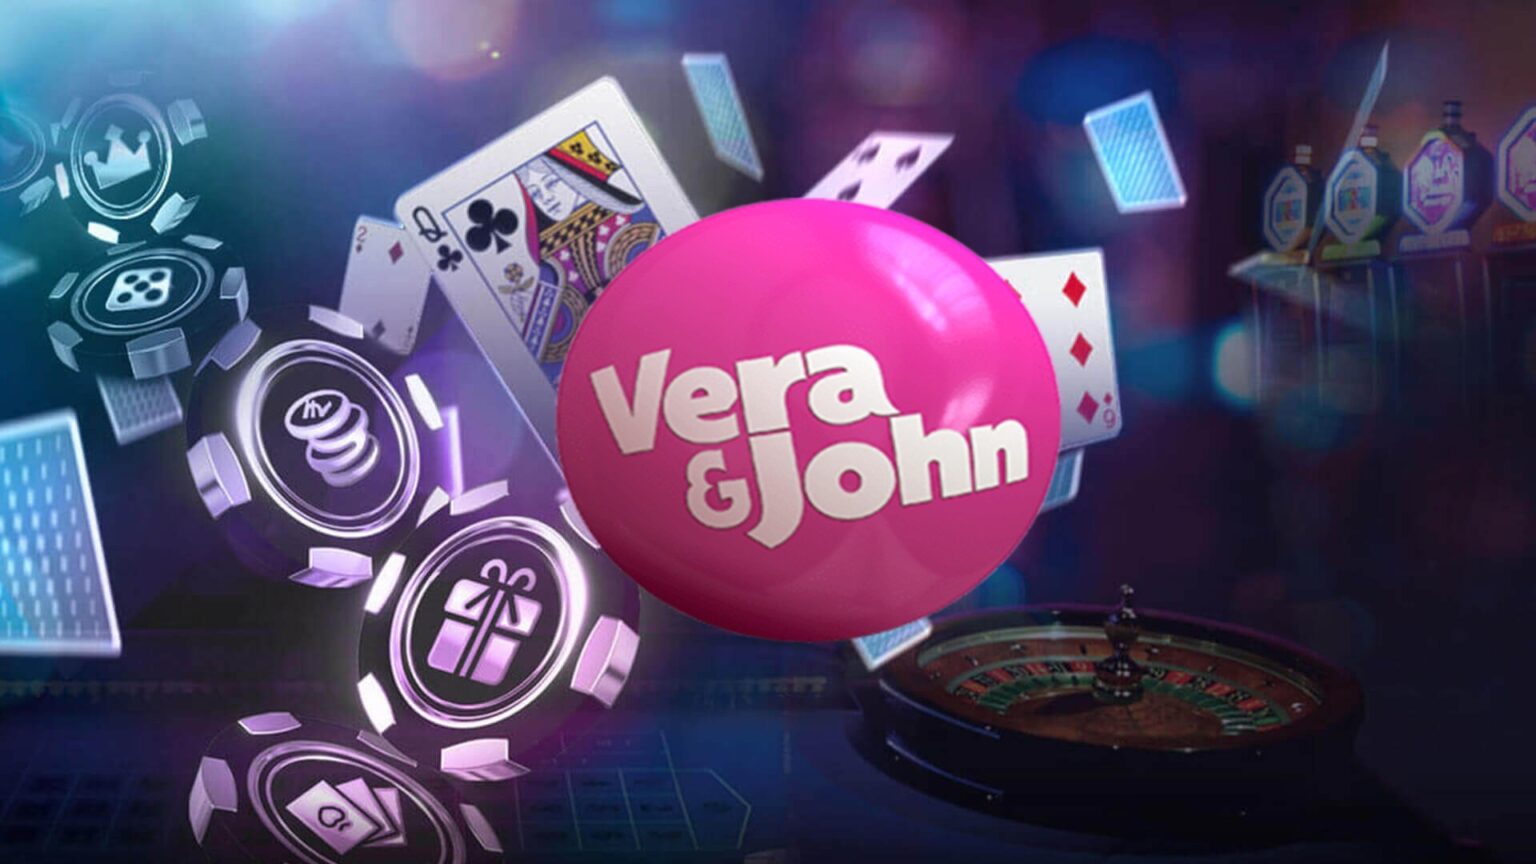 Vera and John casino is the best online casino for Japanese players. Check out some of the casino perks here.